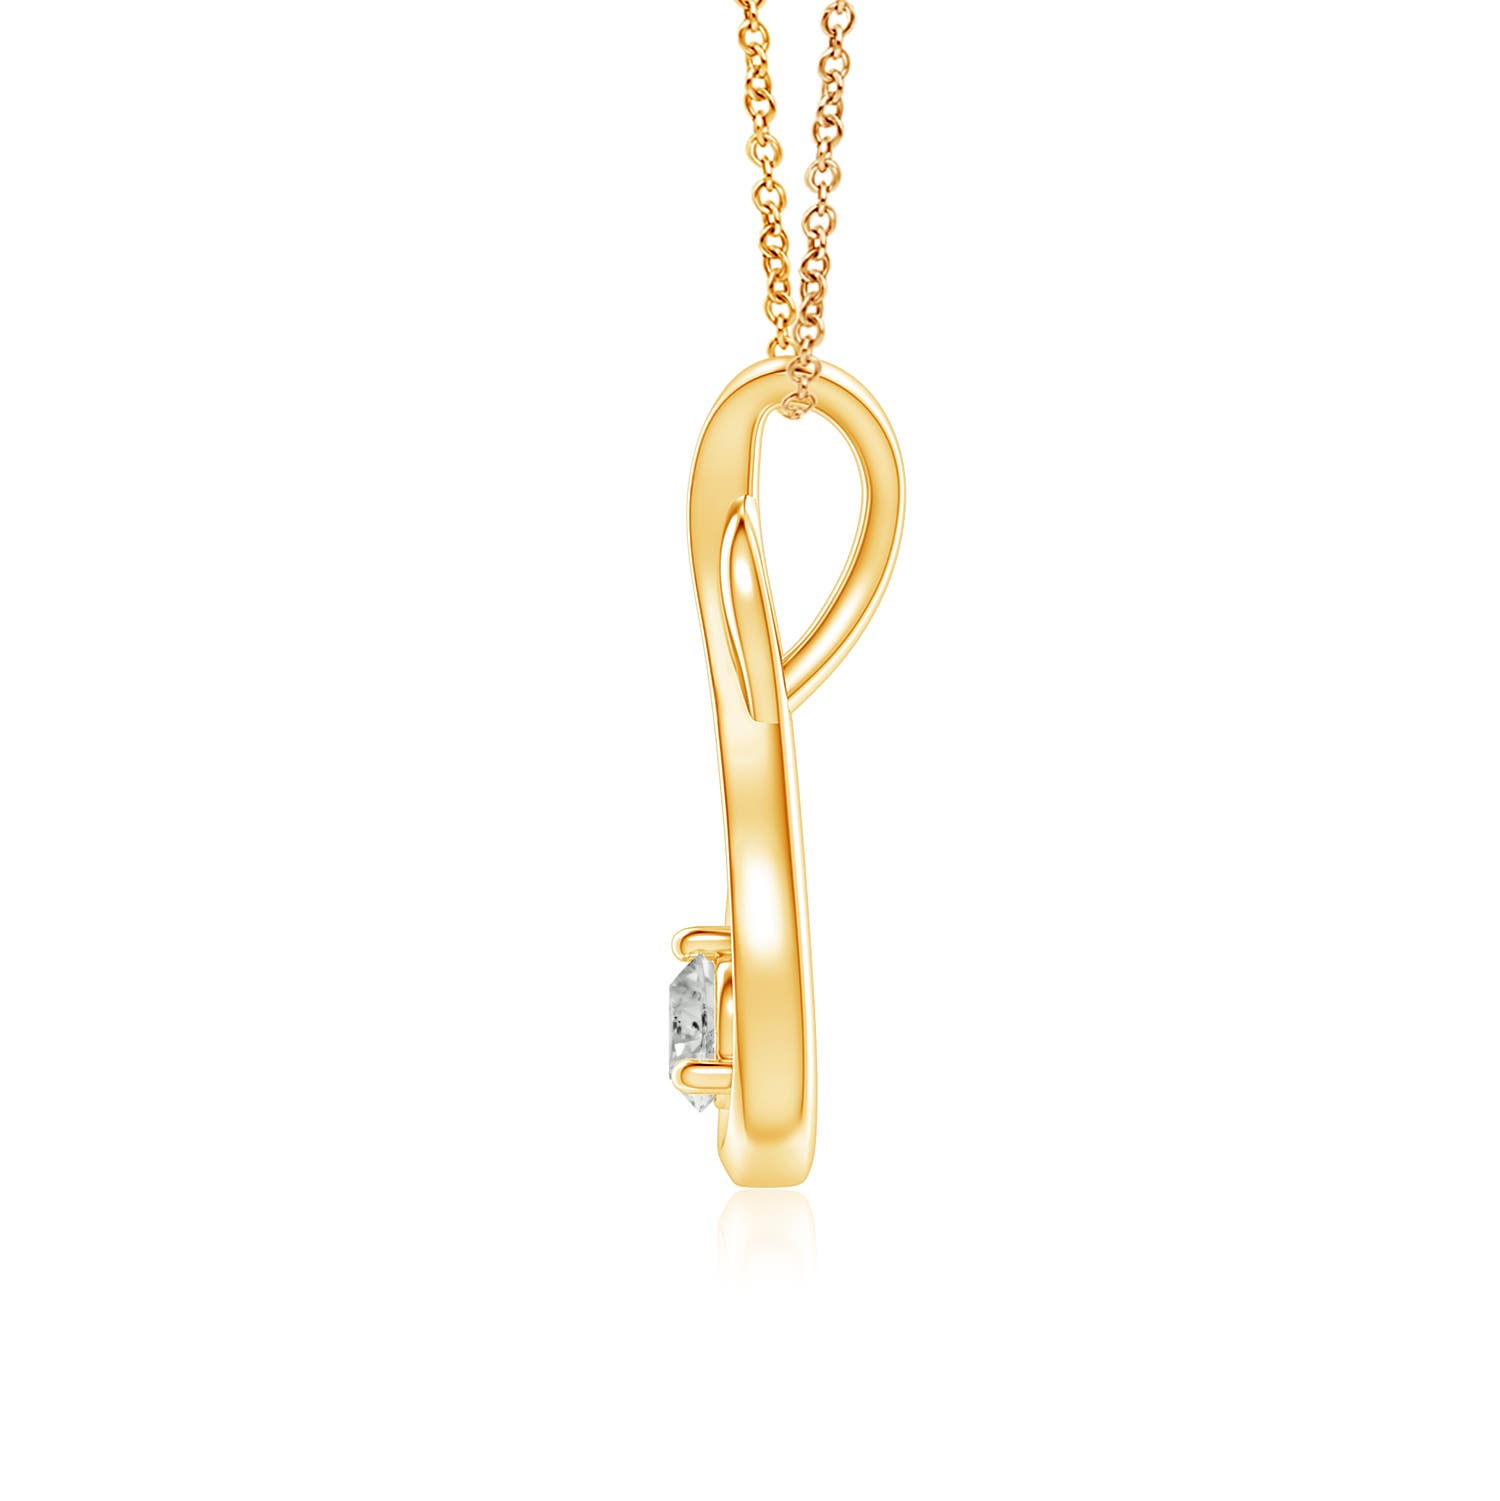 K, I3 / 0.13 CT / 14 KT Yellow Gold